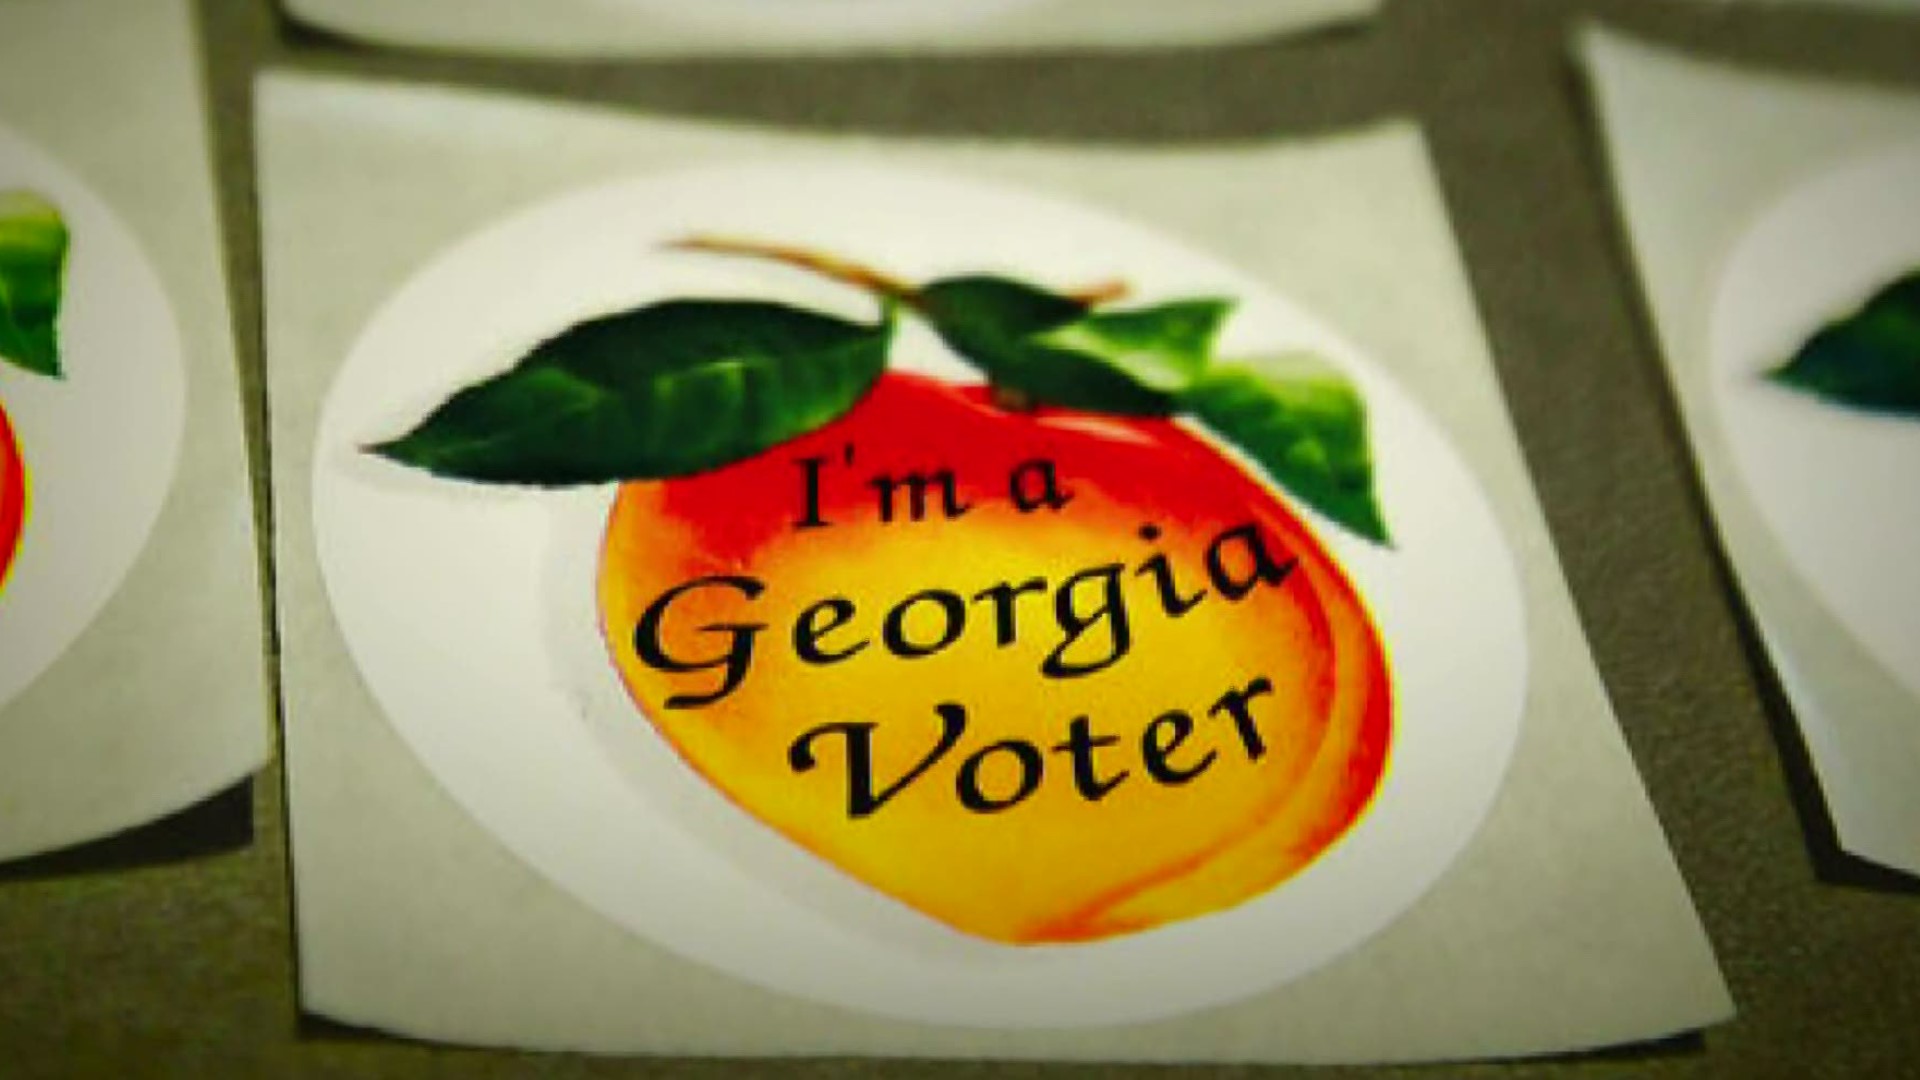 As Georgia’s Republican governor Brian Kemp signed SB 202 into law, the controversy began - sparking nationwide debate about voter suppression.